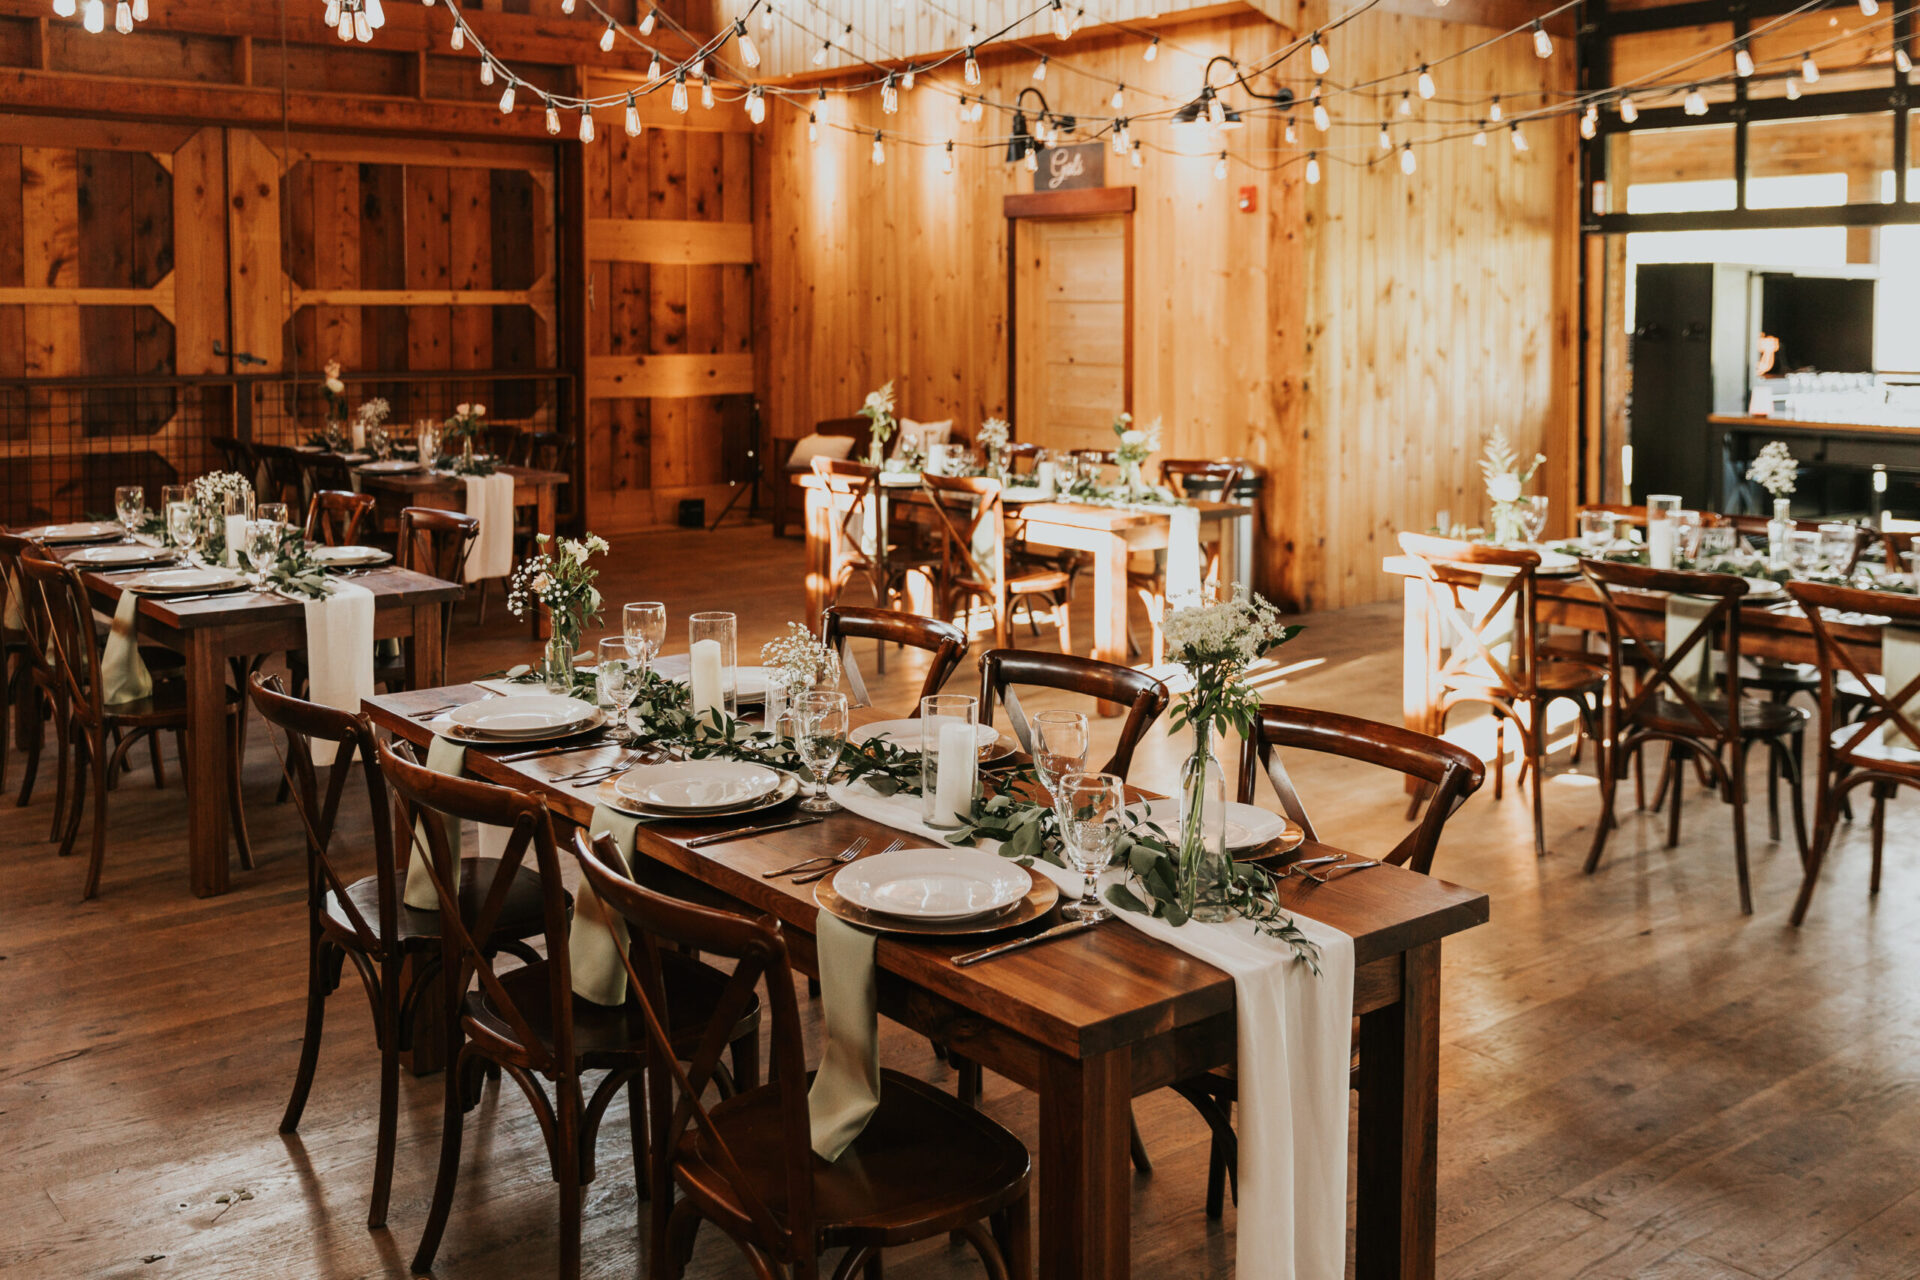 reception banquet with tables and chairs and place settings for elegant wedding in rustic barn